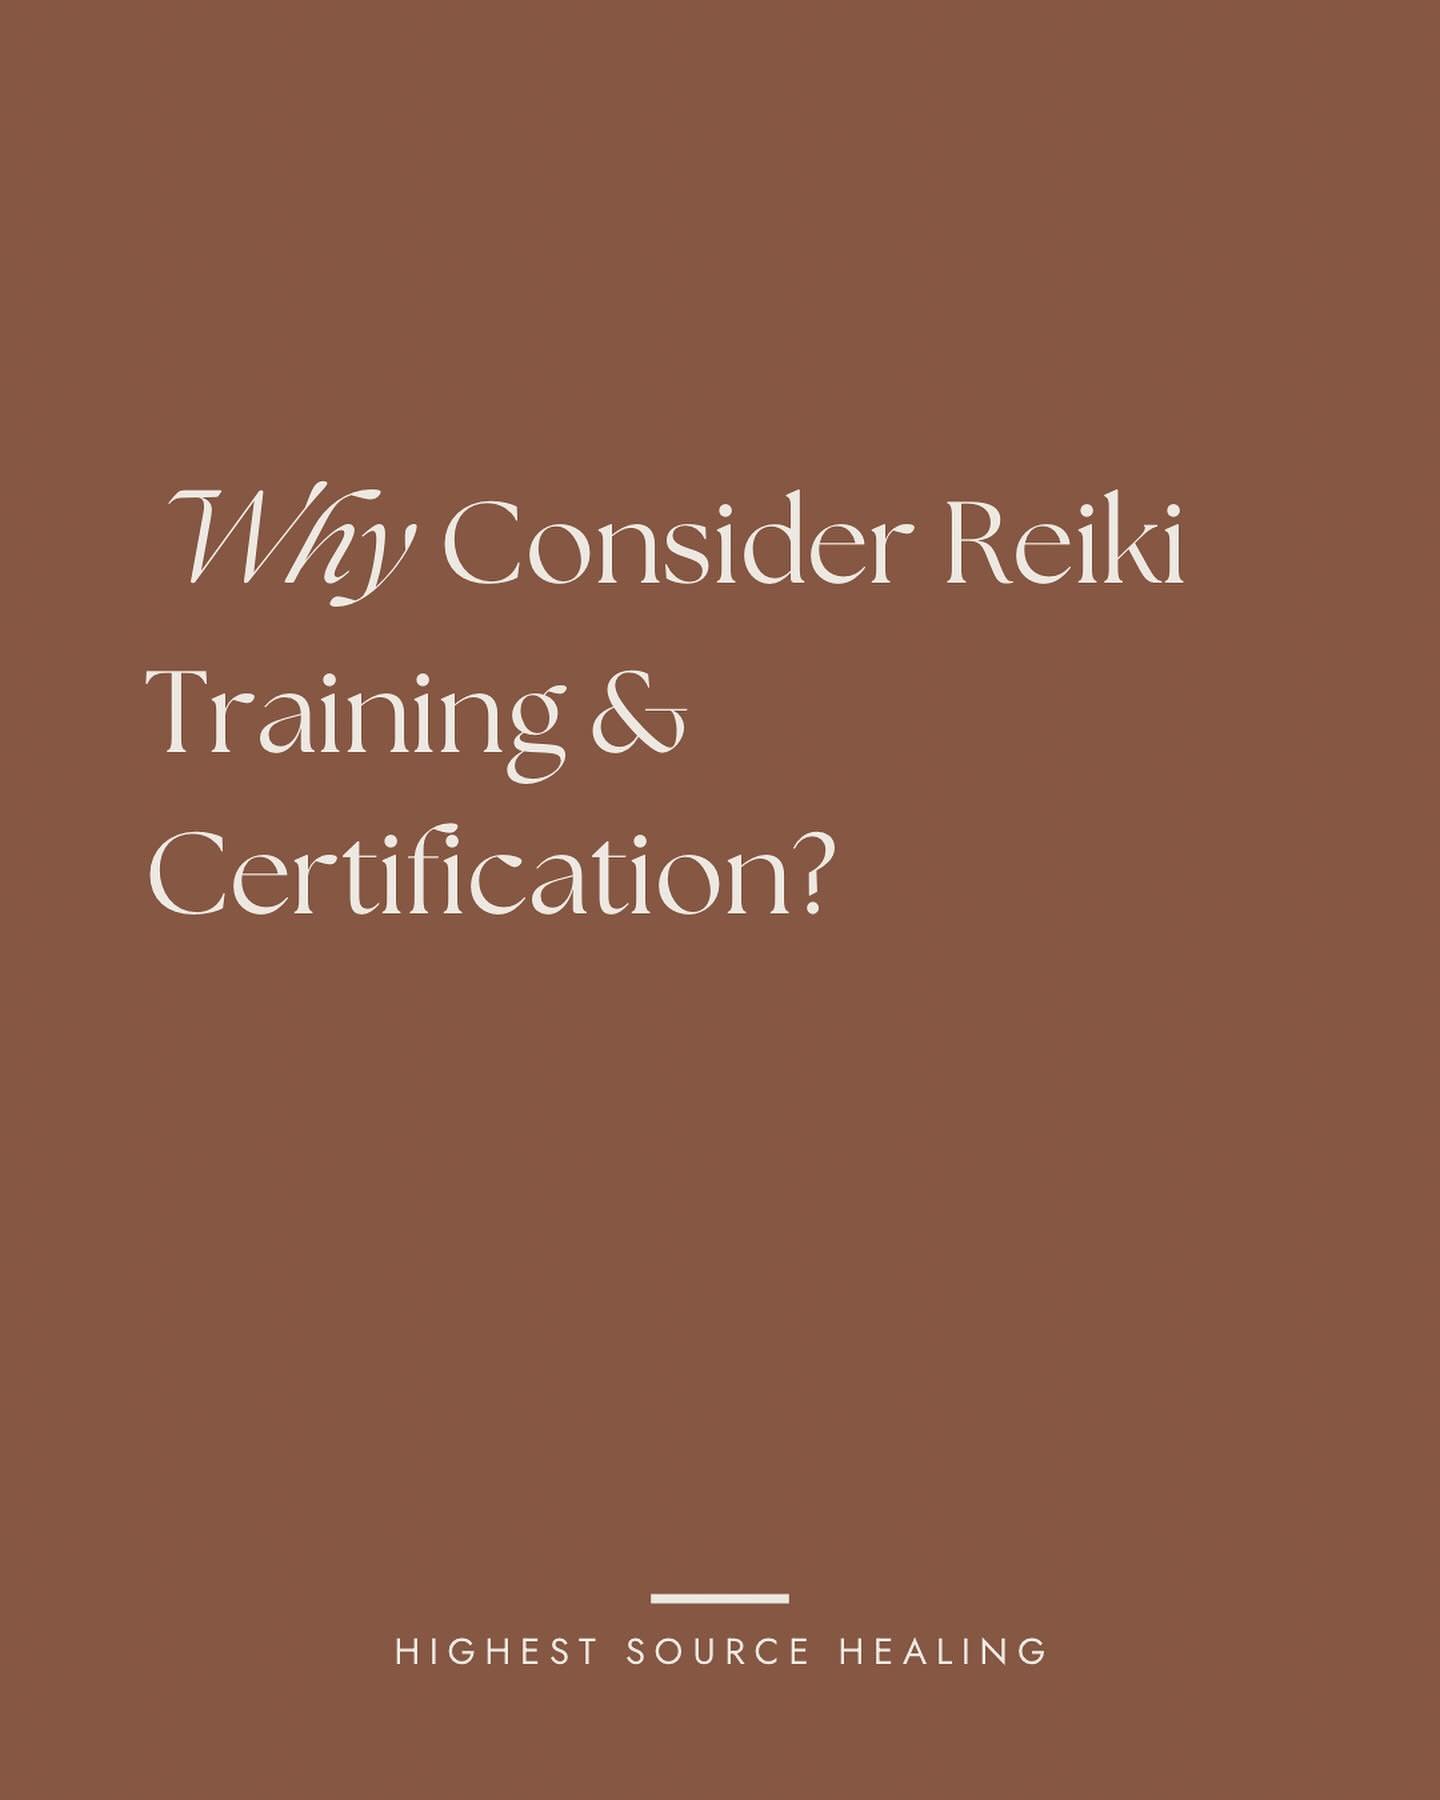 ✨ Unlock a new understanding of Reiki healing and learn how to use the healing touch on YOURSELF and others. 

By learning how to move energy and affect energetic systems, you&rsquo;ll be able to use that knowledge to improve your own health and the 